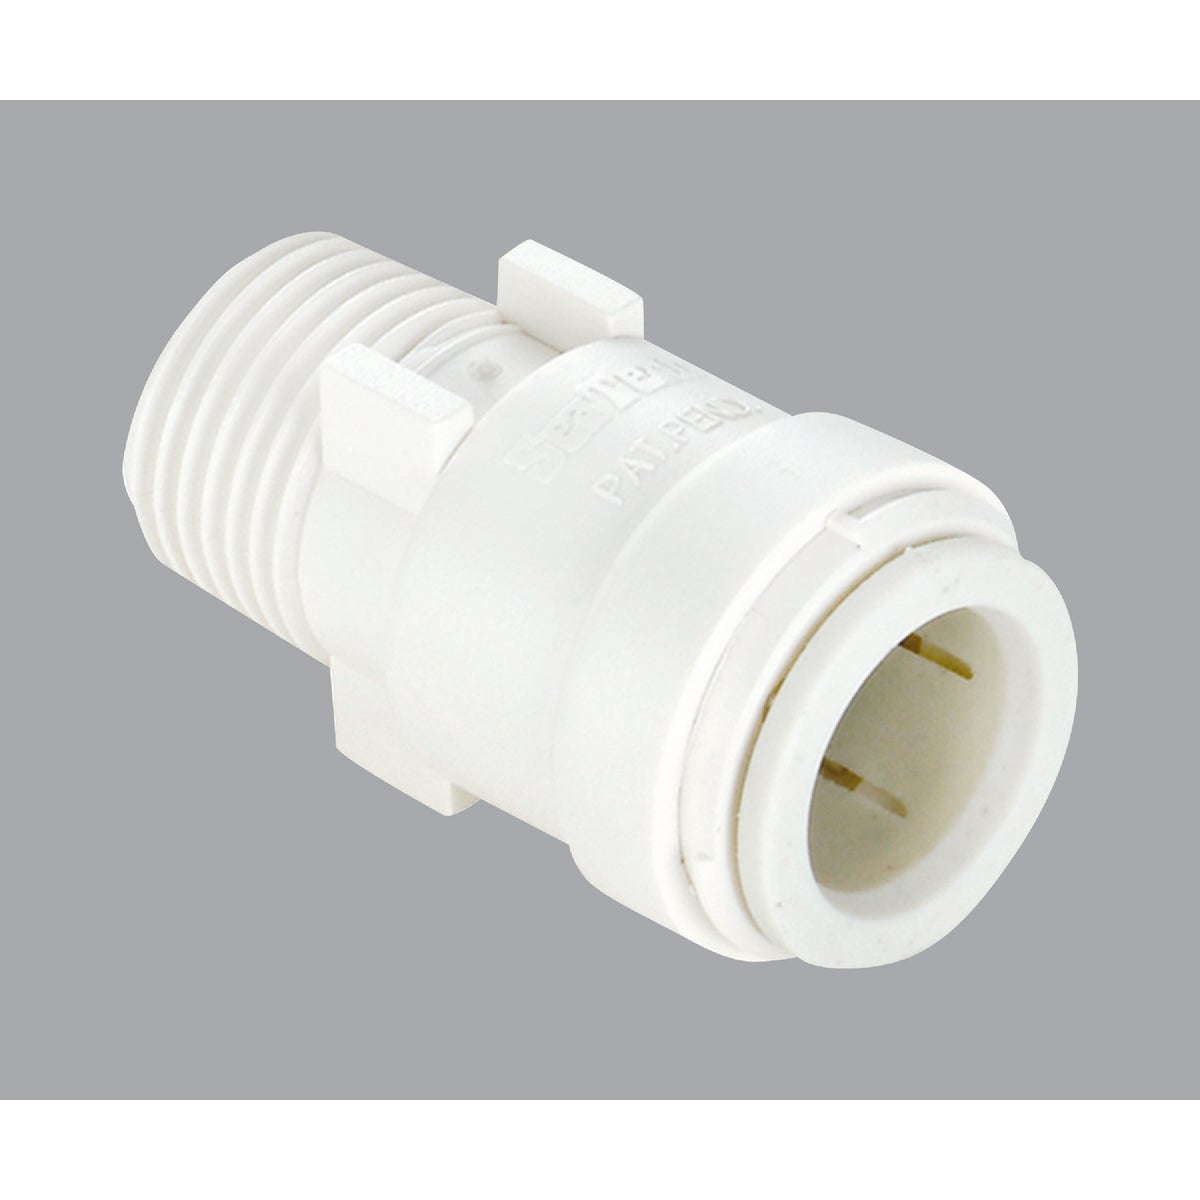 Watts Aqualock 3/4 In. CTS x 3/4 In. MPT Quick Connect Plastic Connector